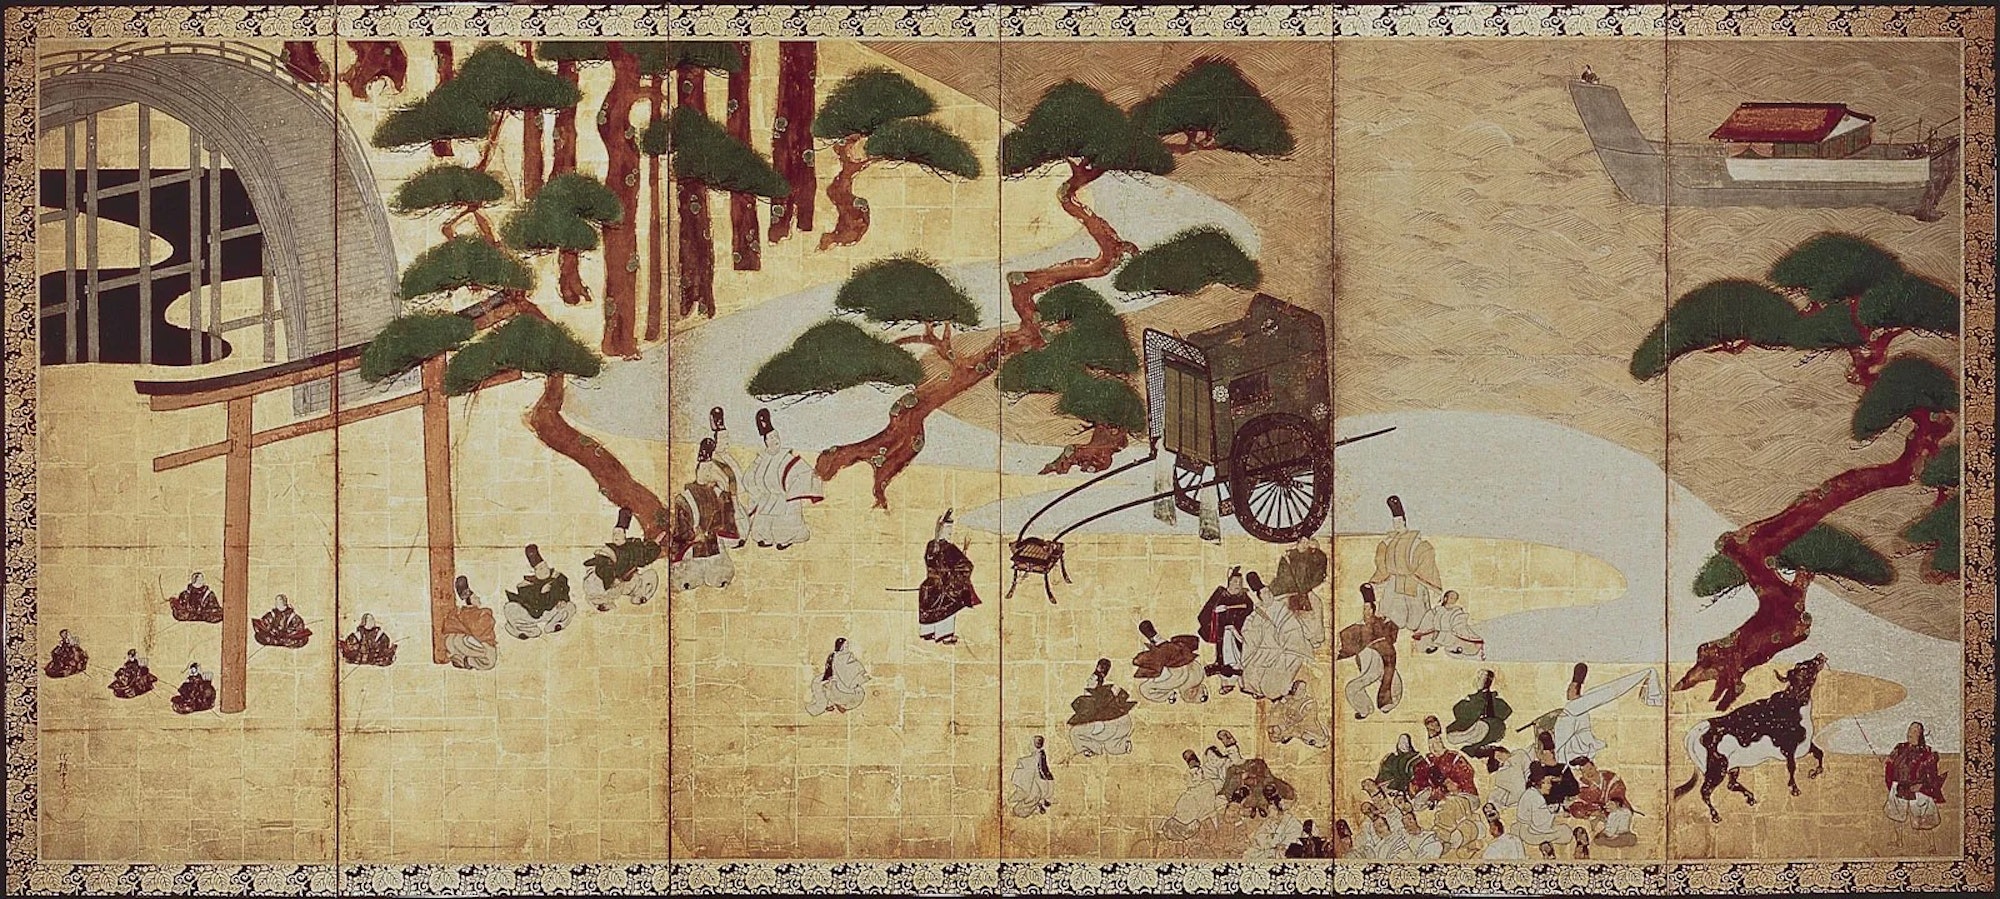 A scroll illustration with drawing of the old Japan